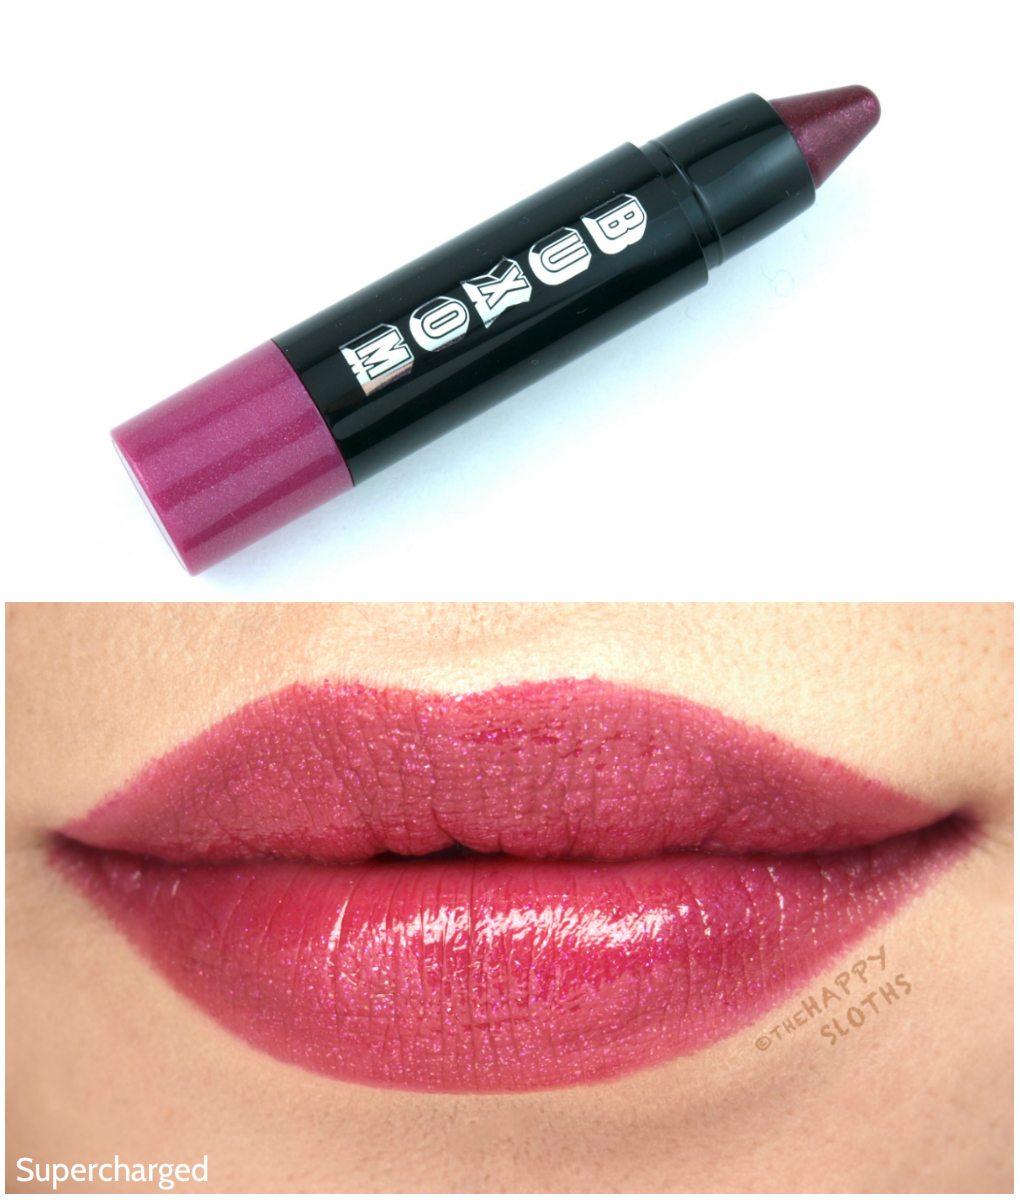 Buxom Shimmer Shock Lip Stick in Supercharged: Review and Swatches